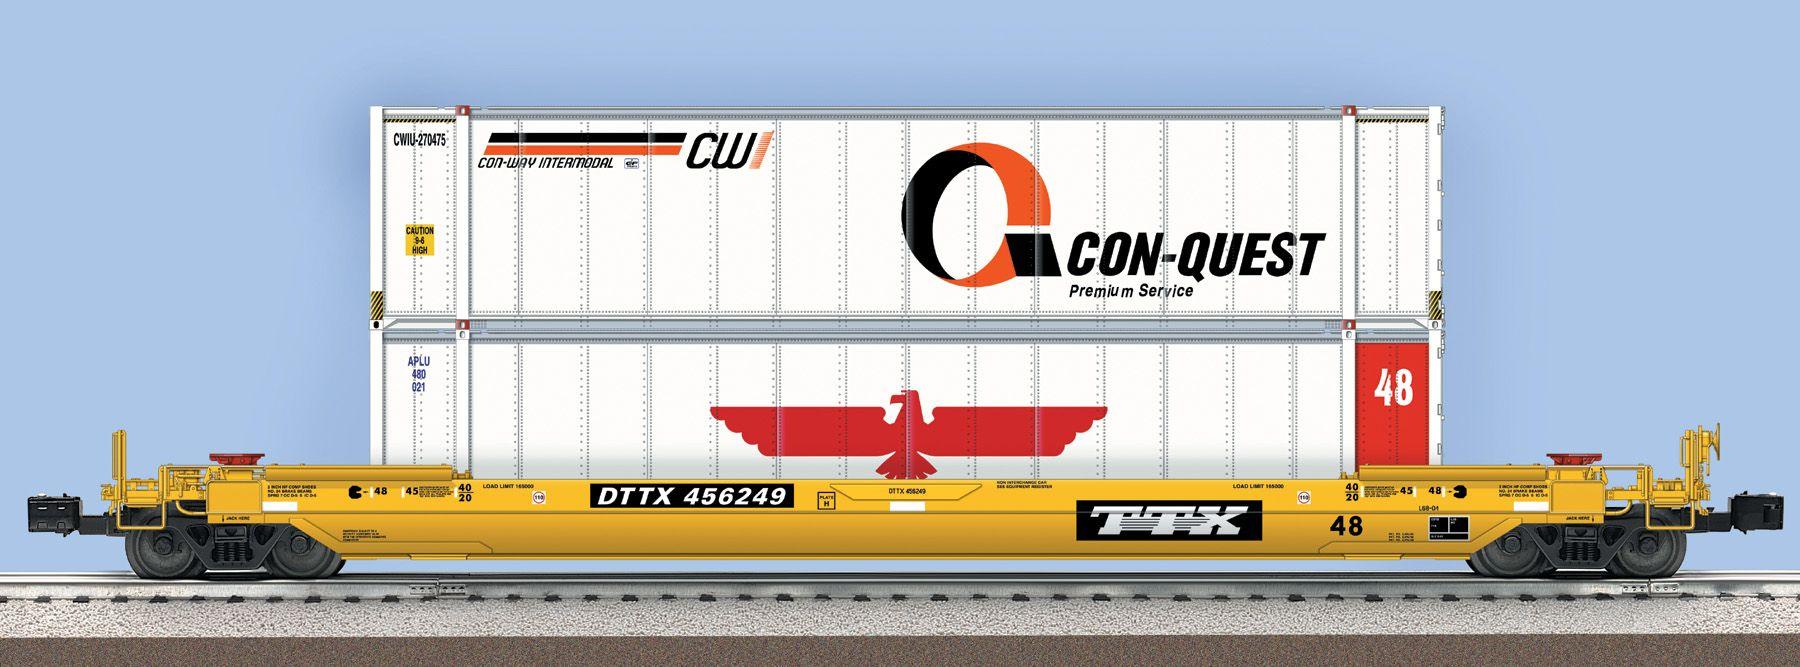 TTX Railroad Logo - Freight Car Friday – The Many Faces of Trailer Train | Lionel Trains